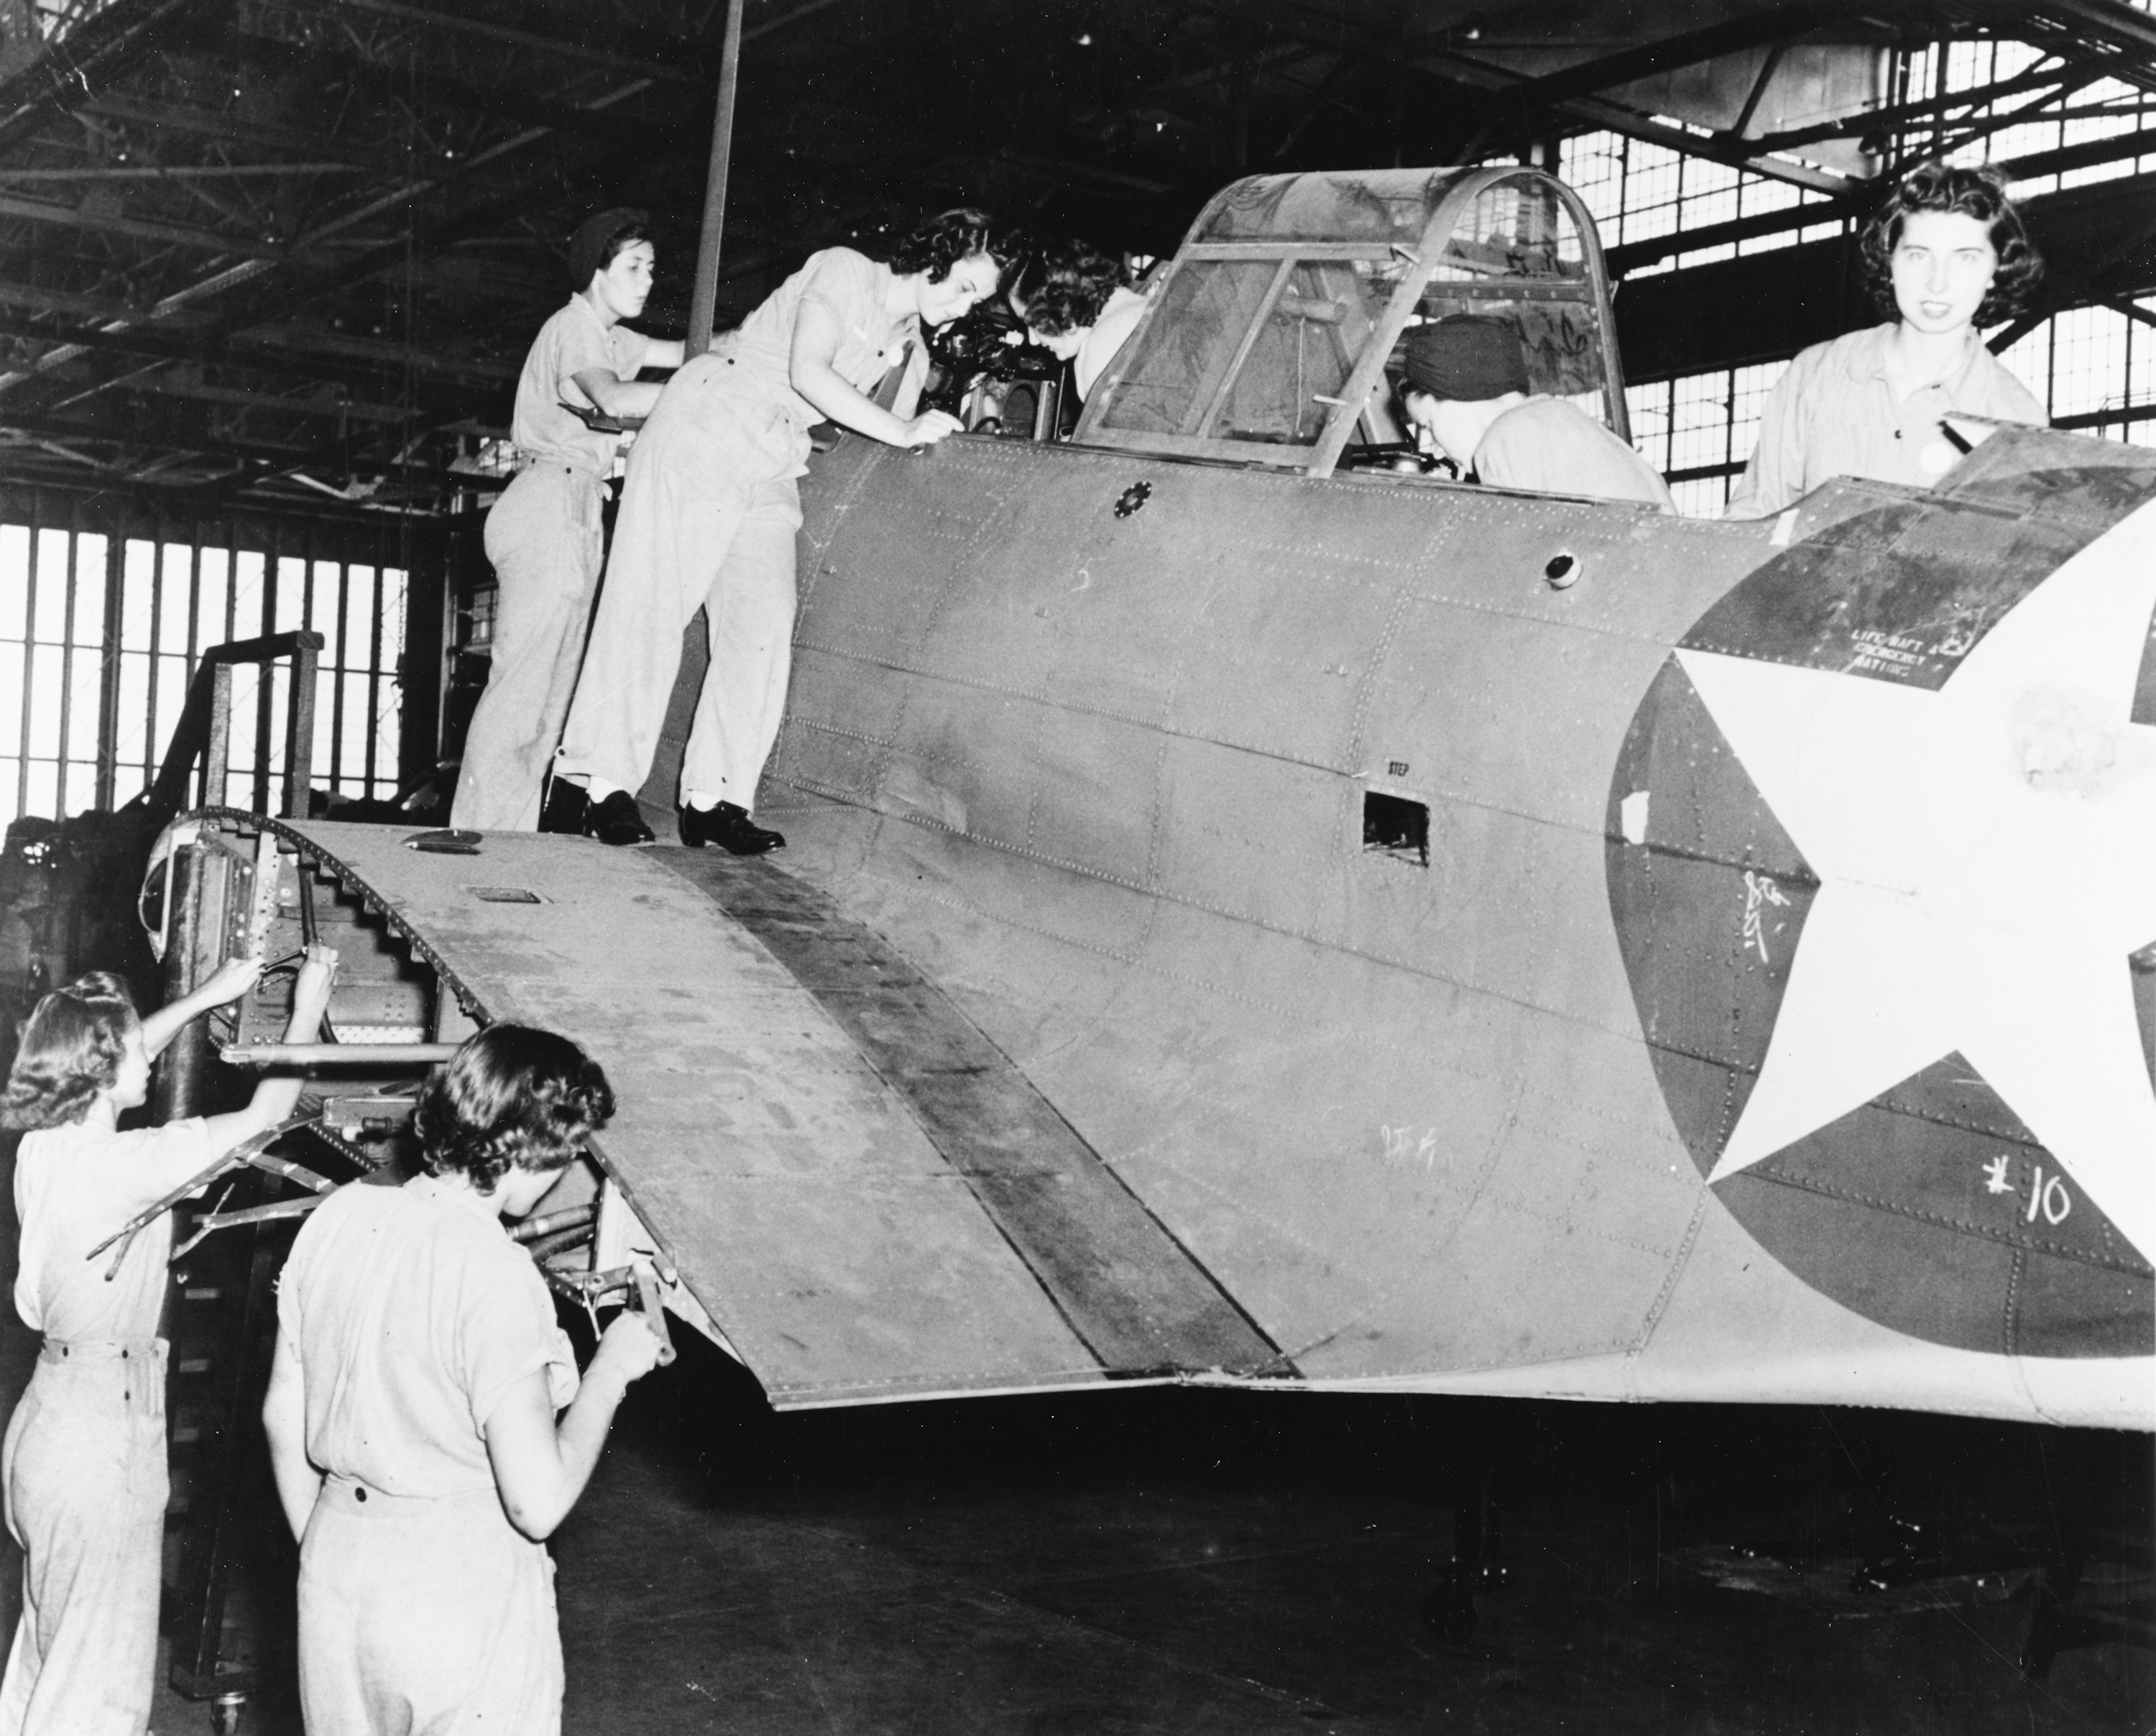 WAVES Working on SBD Dauntless Aircraft